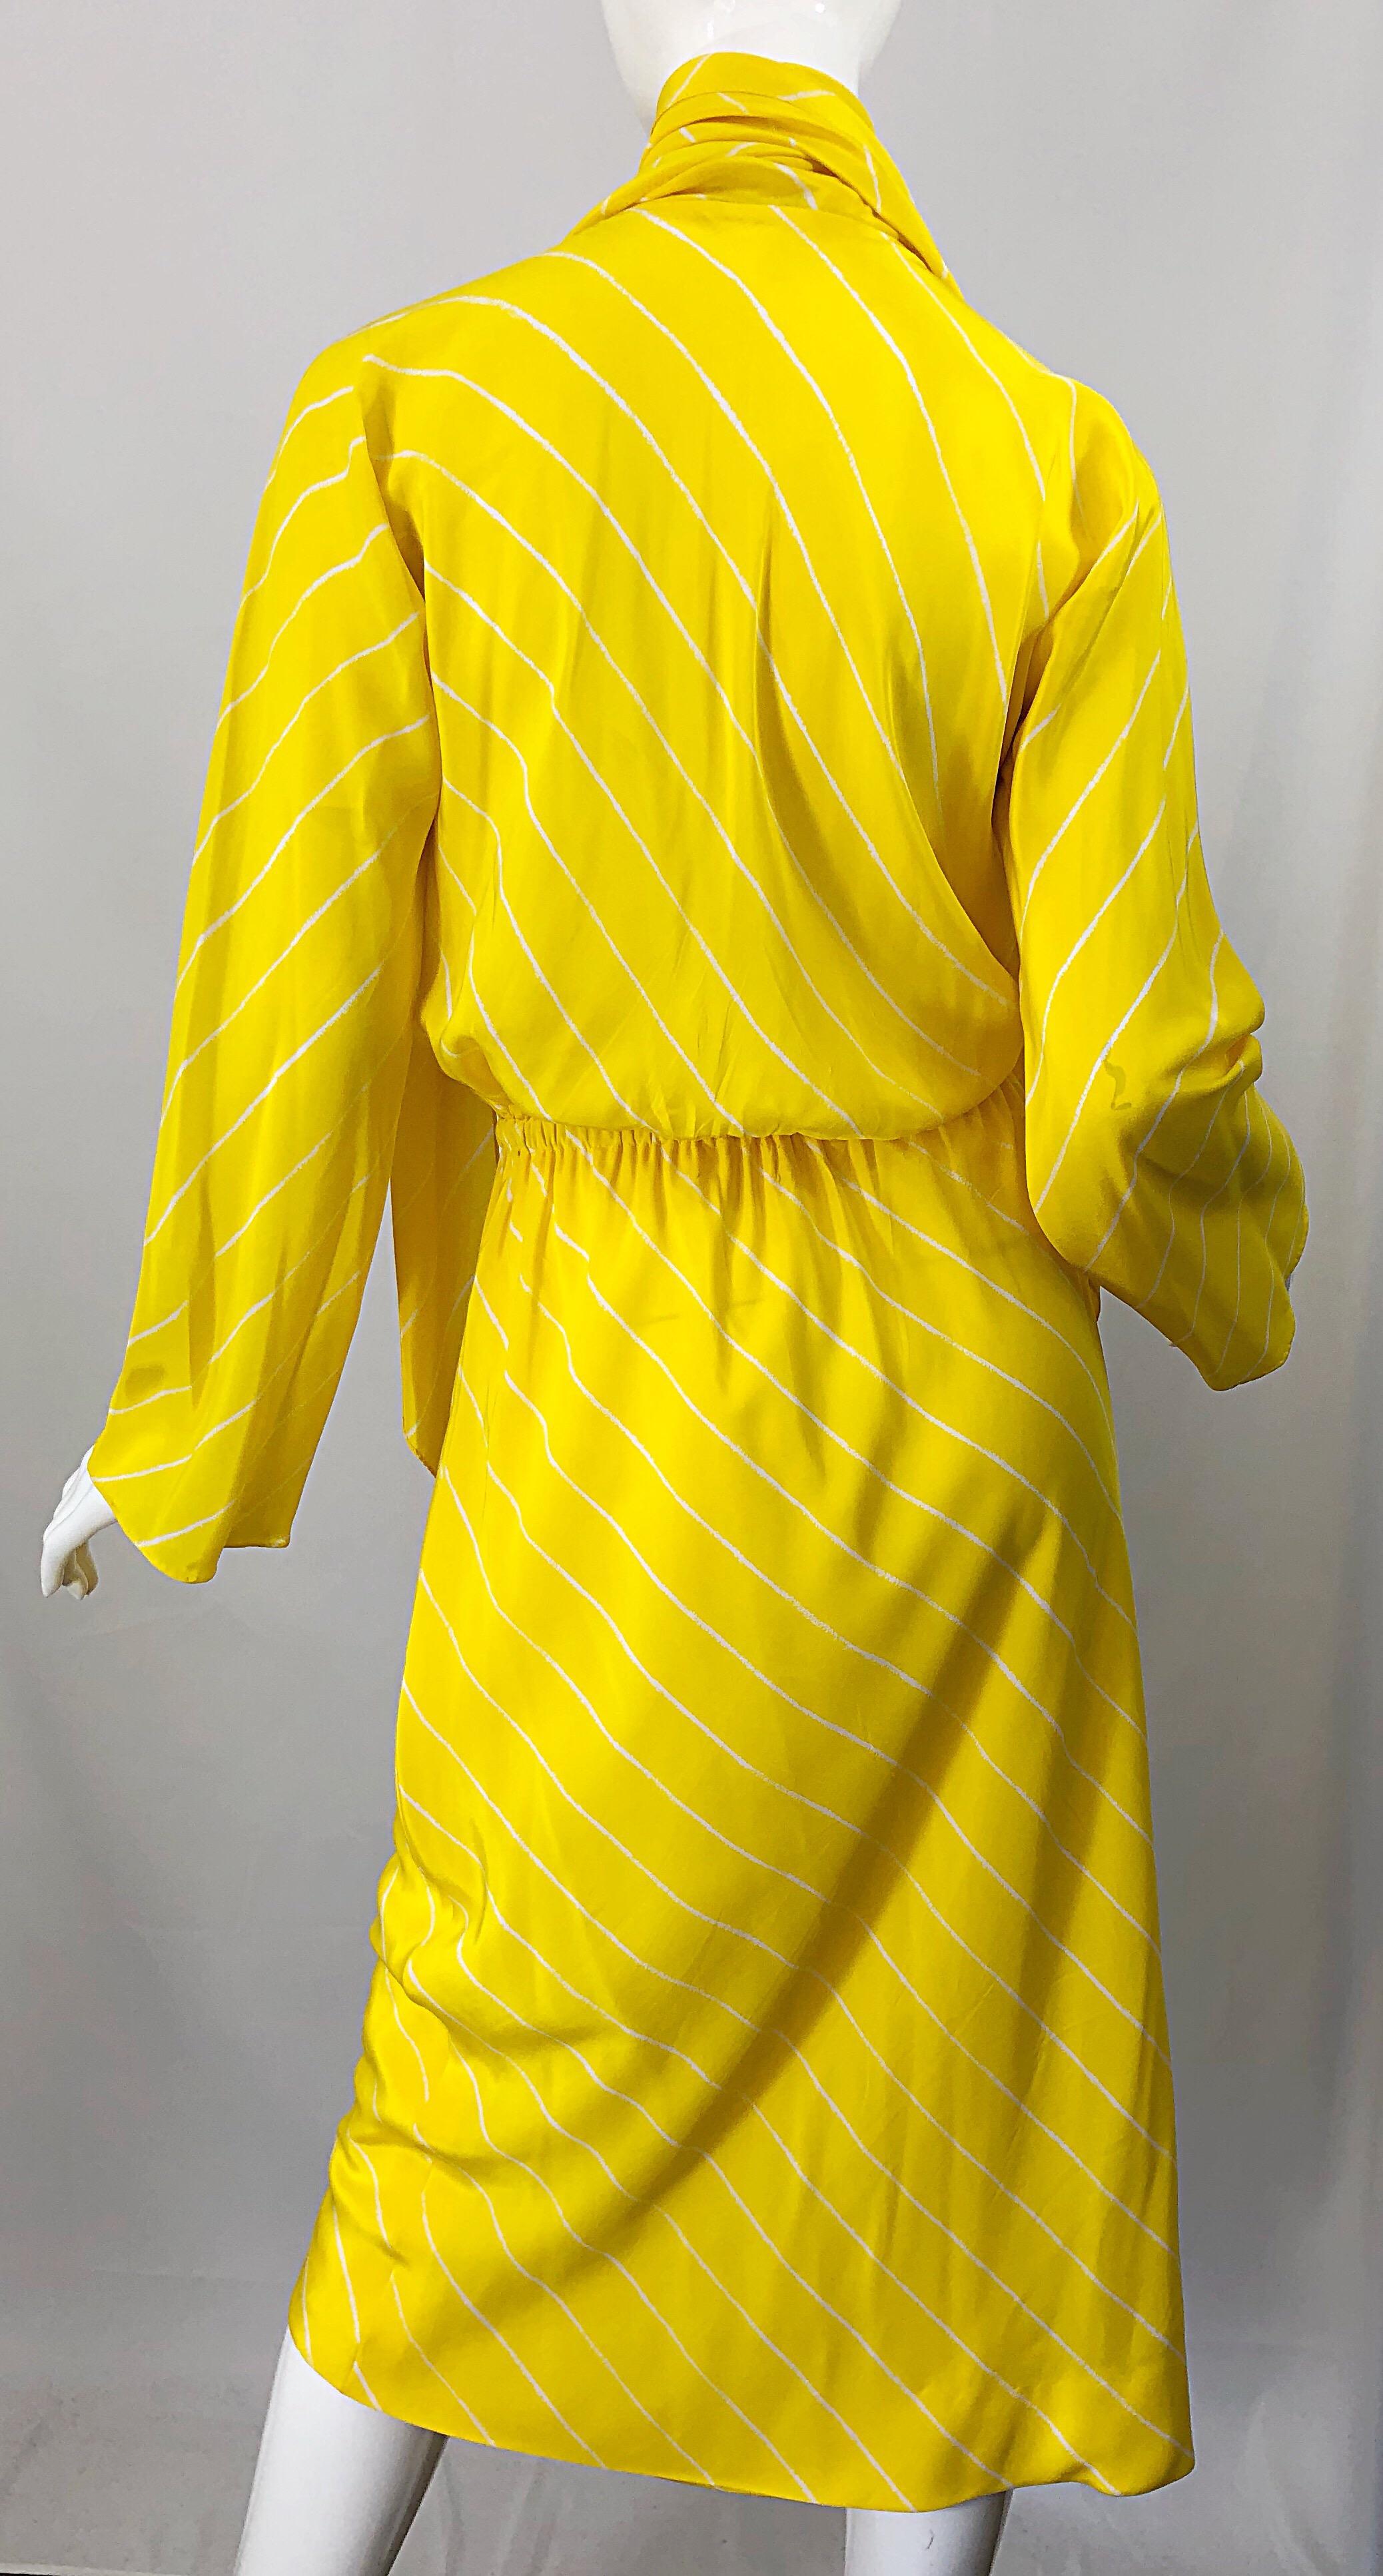 1970s Halston Canary Yellow + White Chevron Striped Bell Sleeve 70s Scarf Dress 7